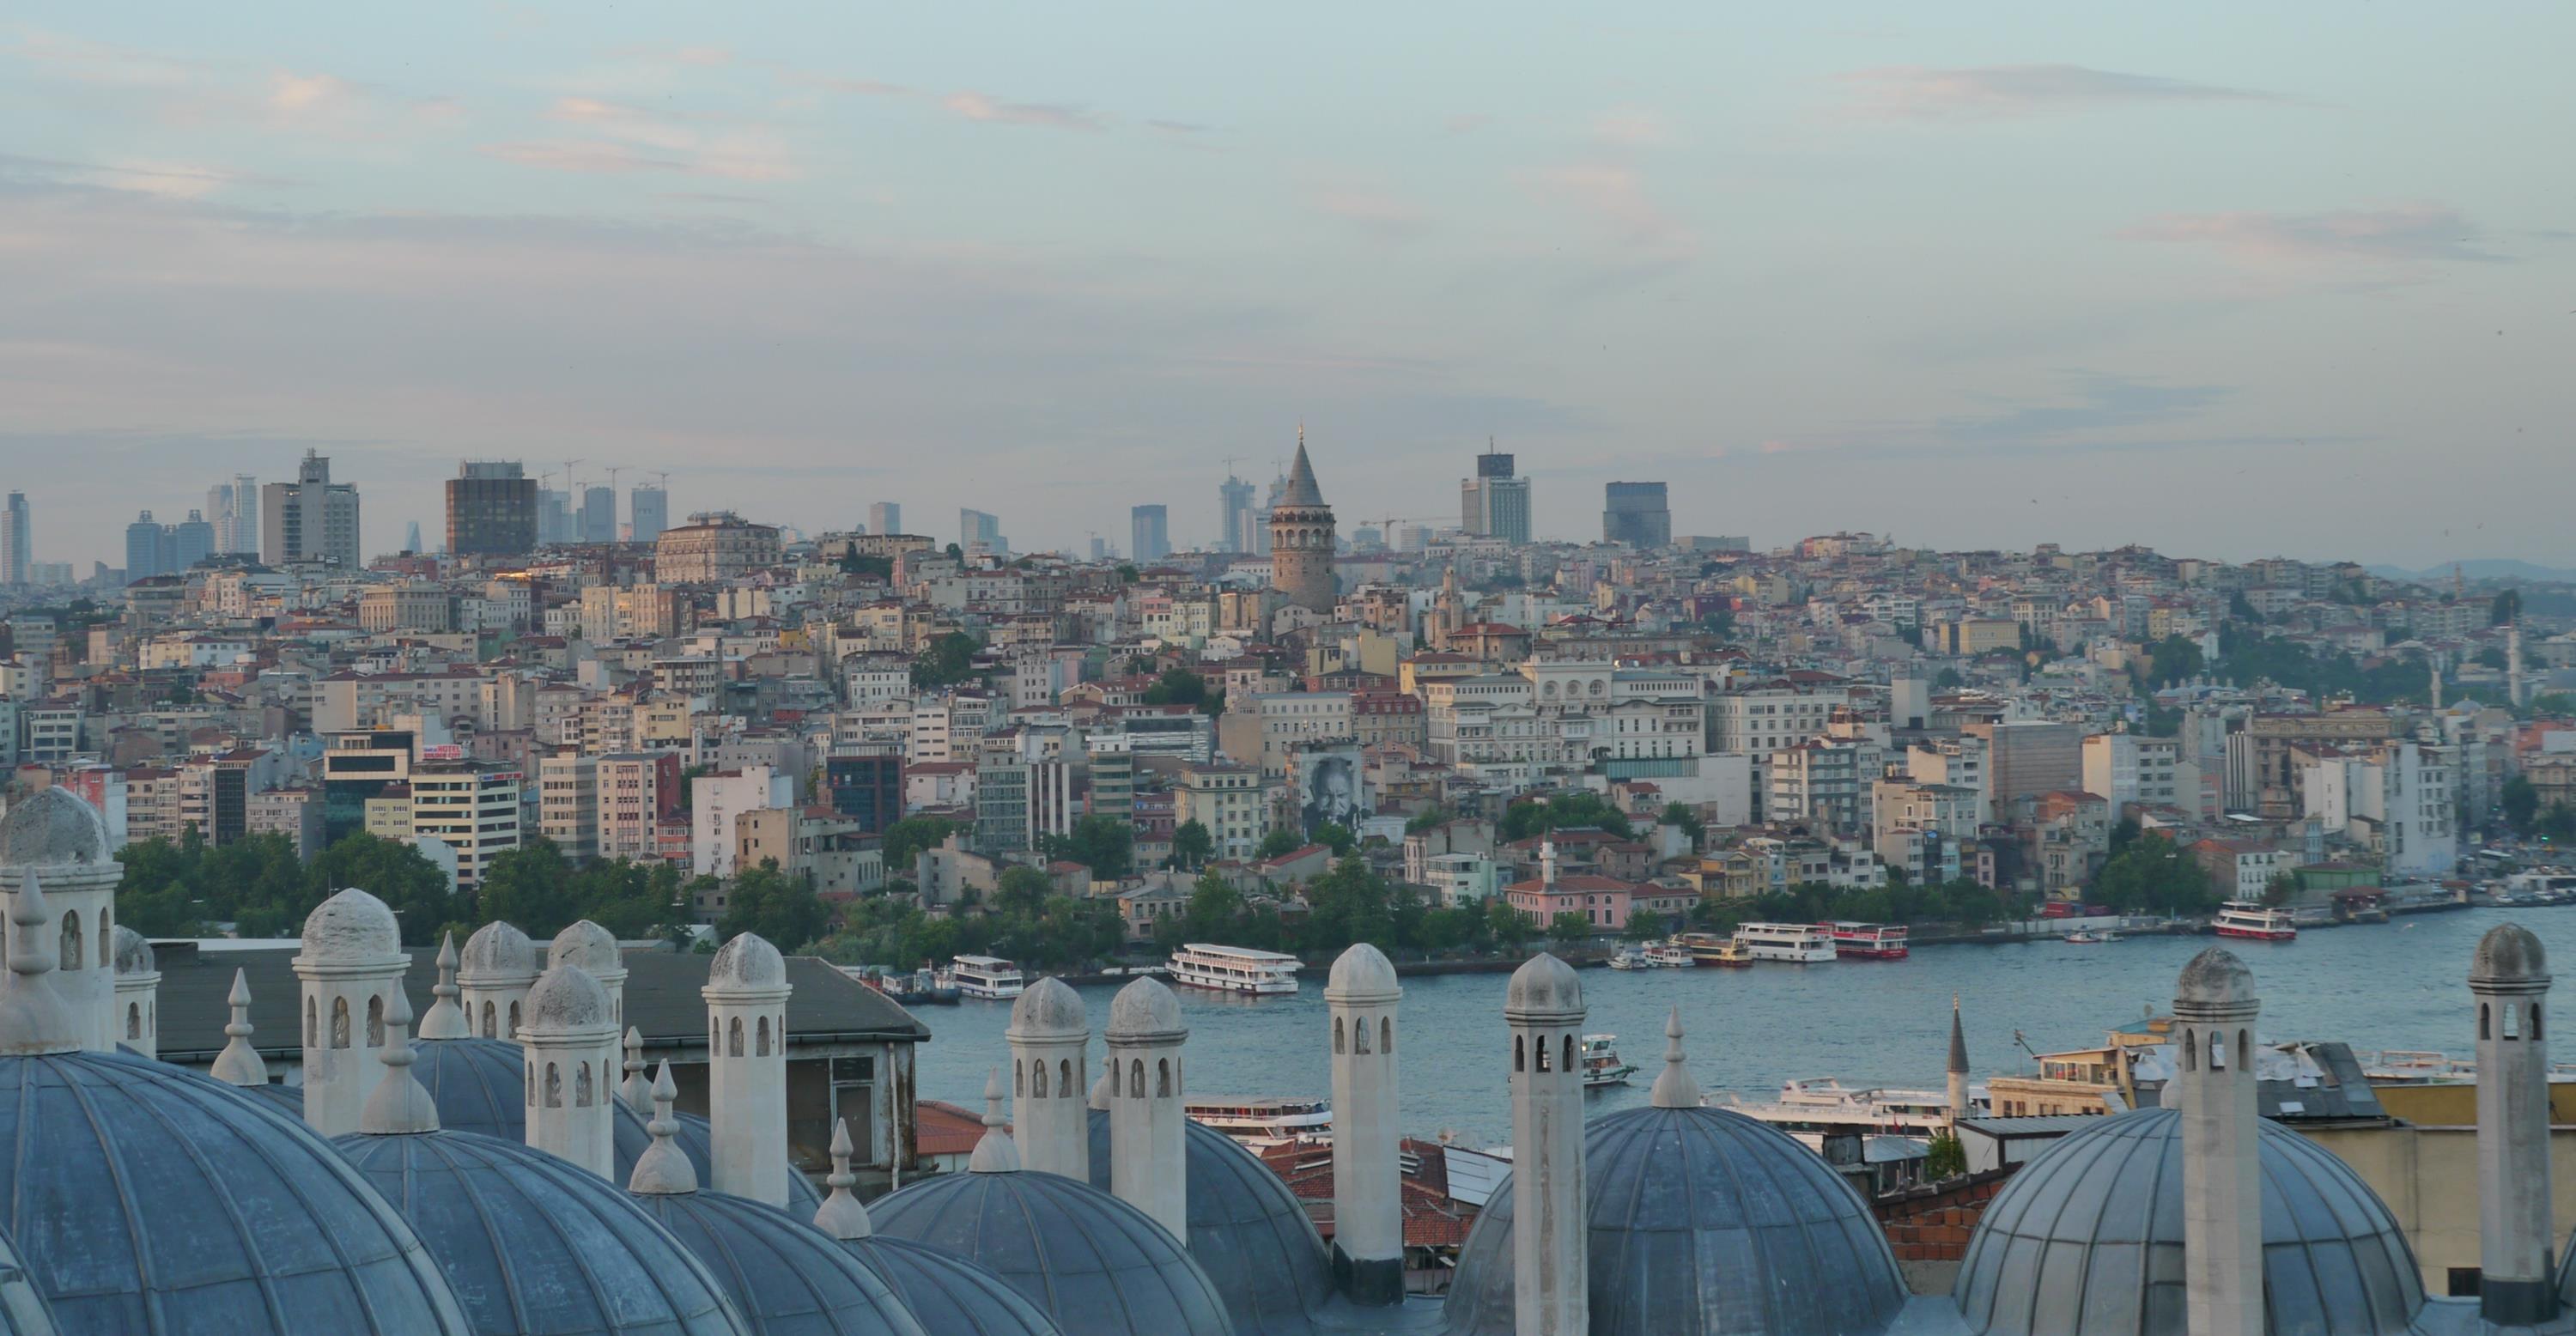 Looking across the Golden Horn to Galata Tower from Suleymaniye Mosque